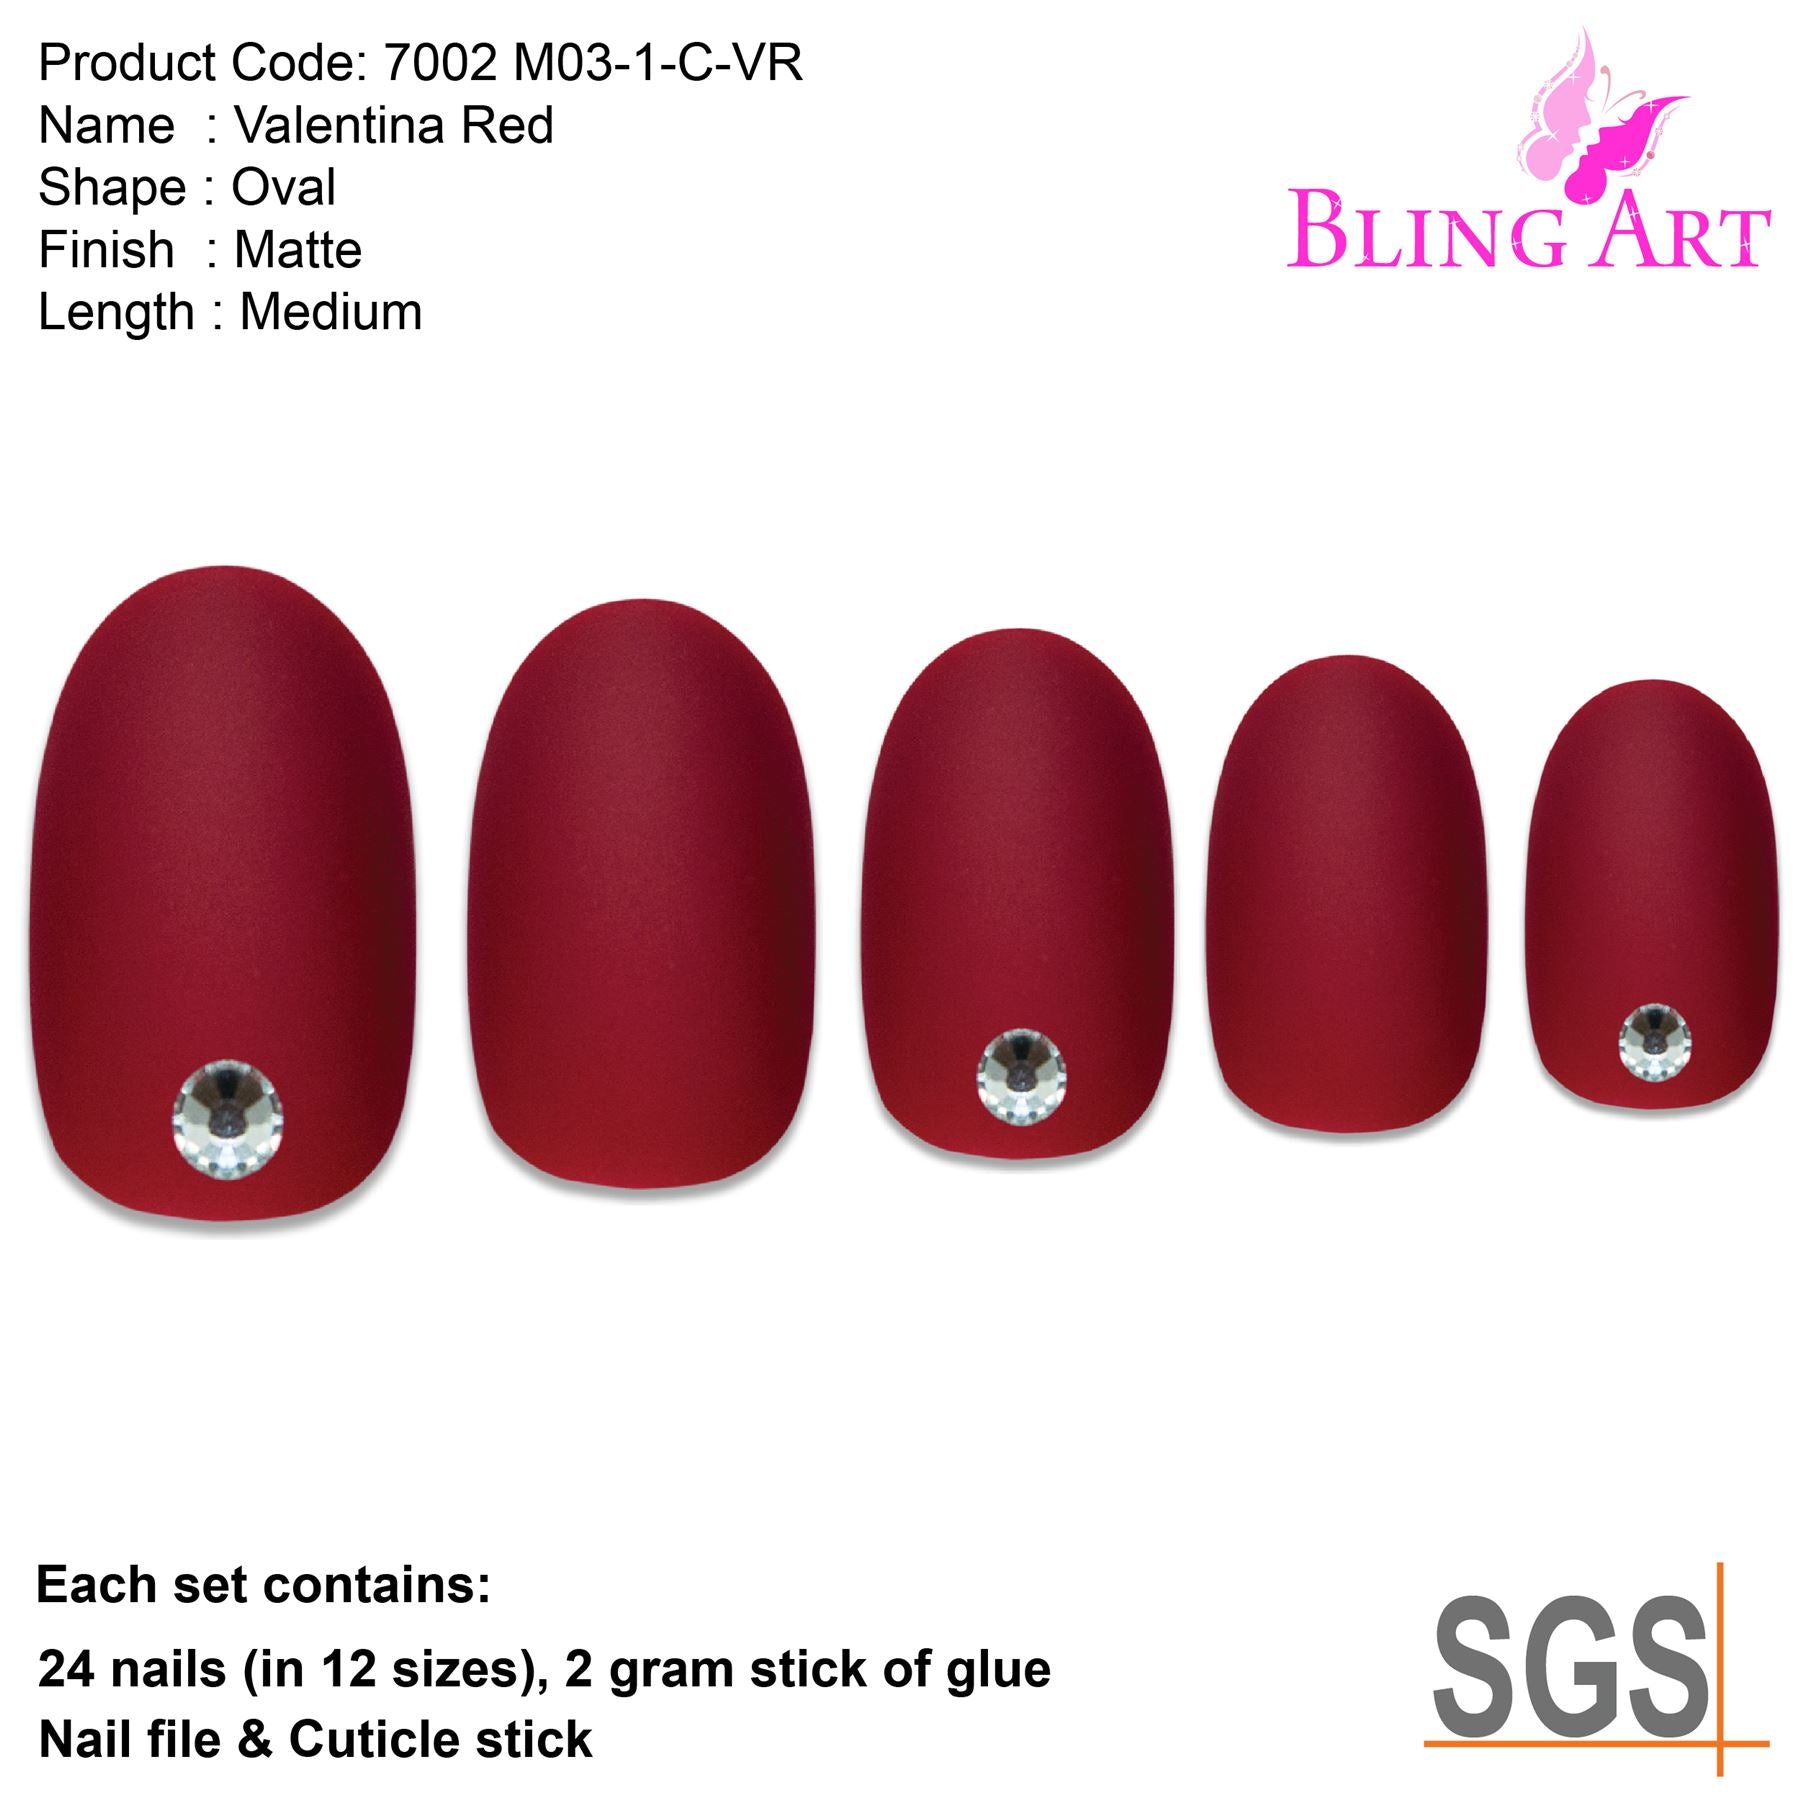 False Nails by Bling Art Red Matte Oval Medium Fake Acrylic 24 Tips with Glue